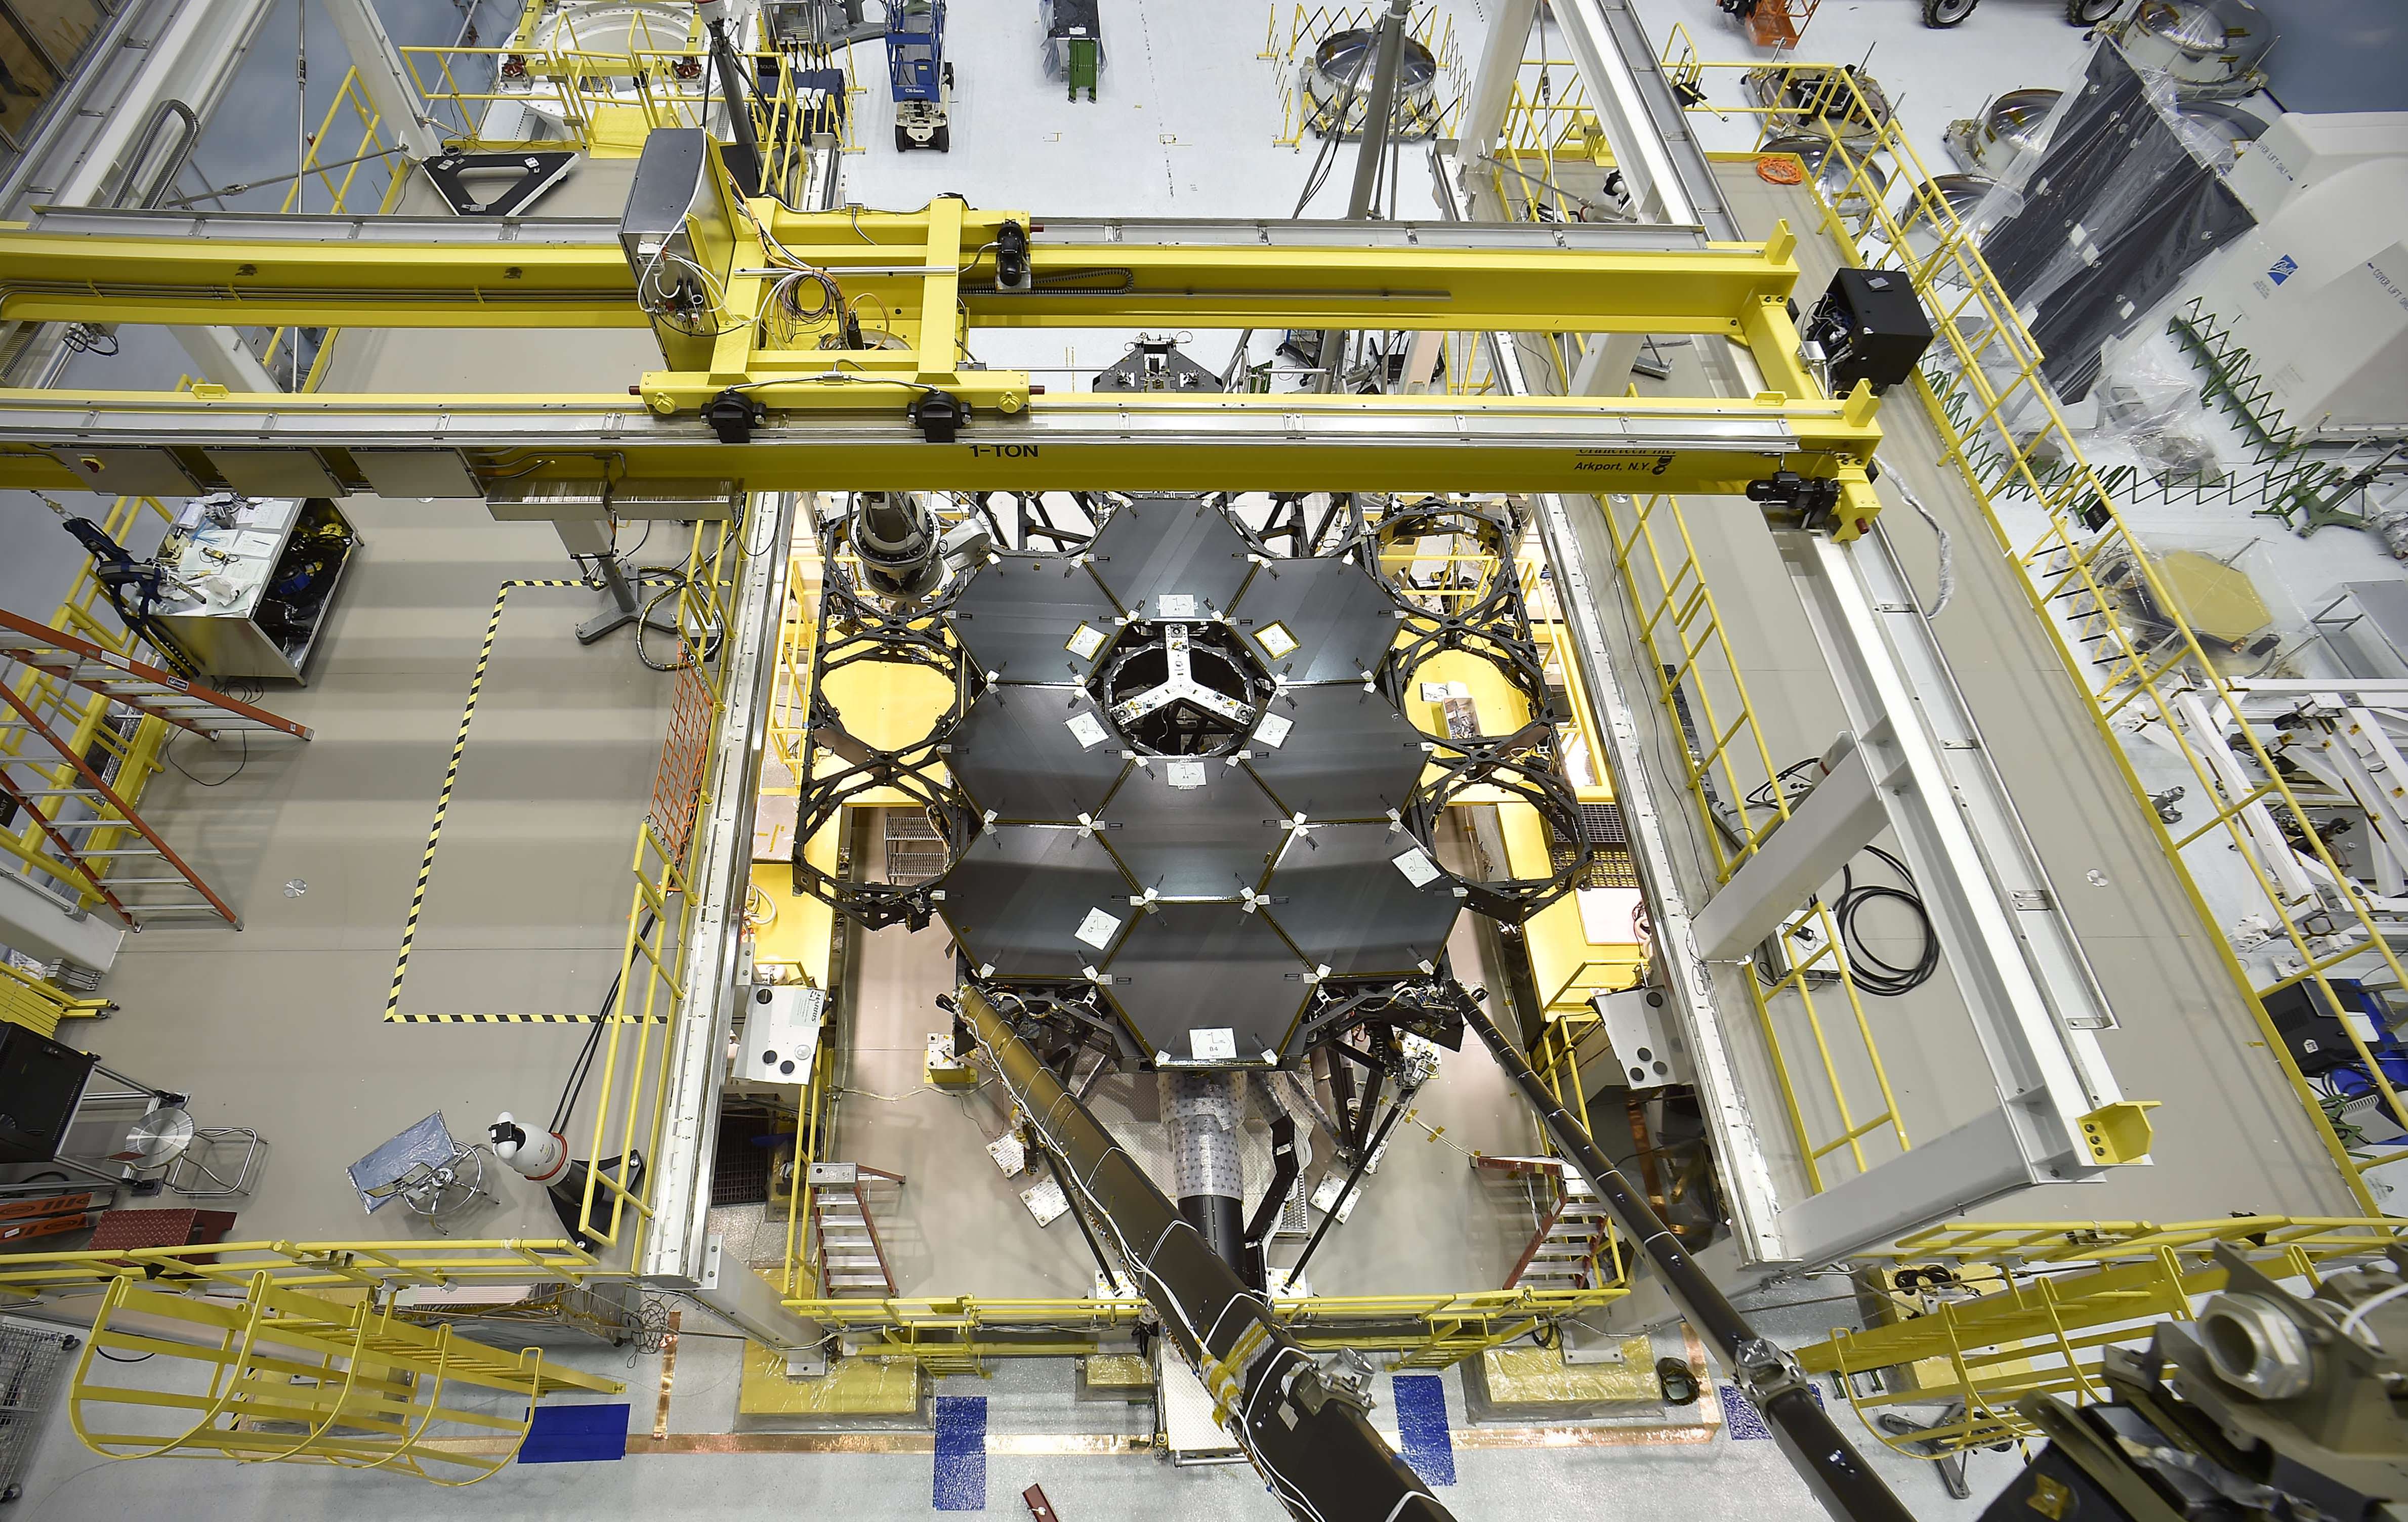 This rare overhead shot of the James Webb Space Telescope shows the nine primary flight mirrors installed on the telescope structure in a clean room at NASA's Goddard Space Flight Center in Greenbelt, Maryland. Credits: NASA's Goddard Space Flight Center/Chris Gunn